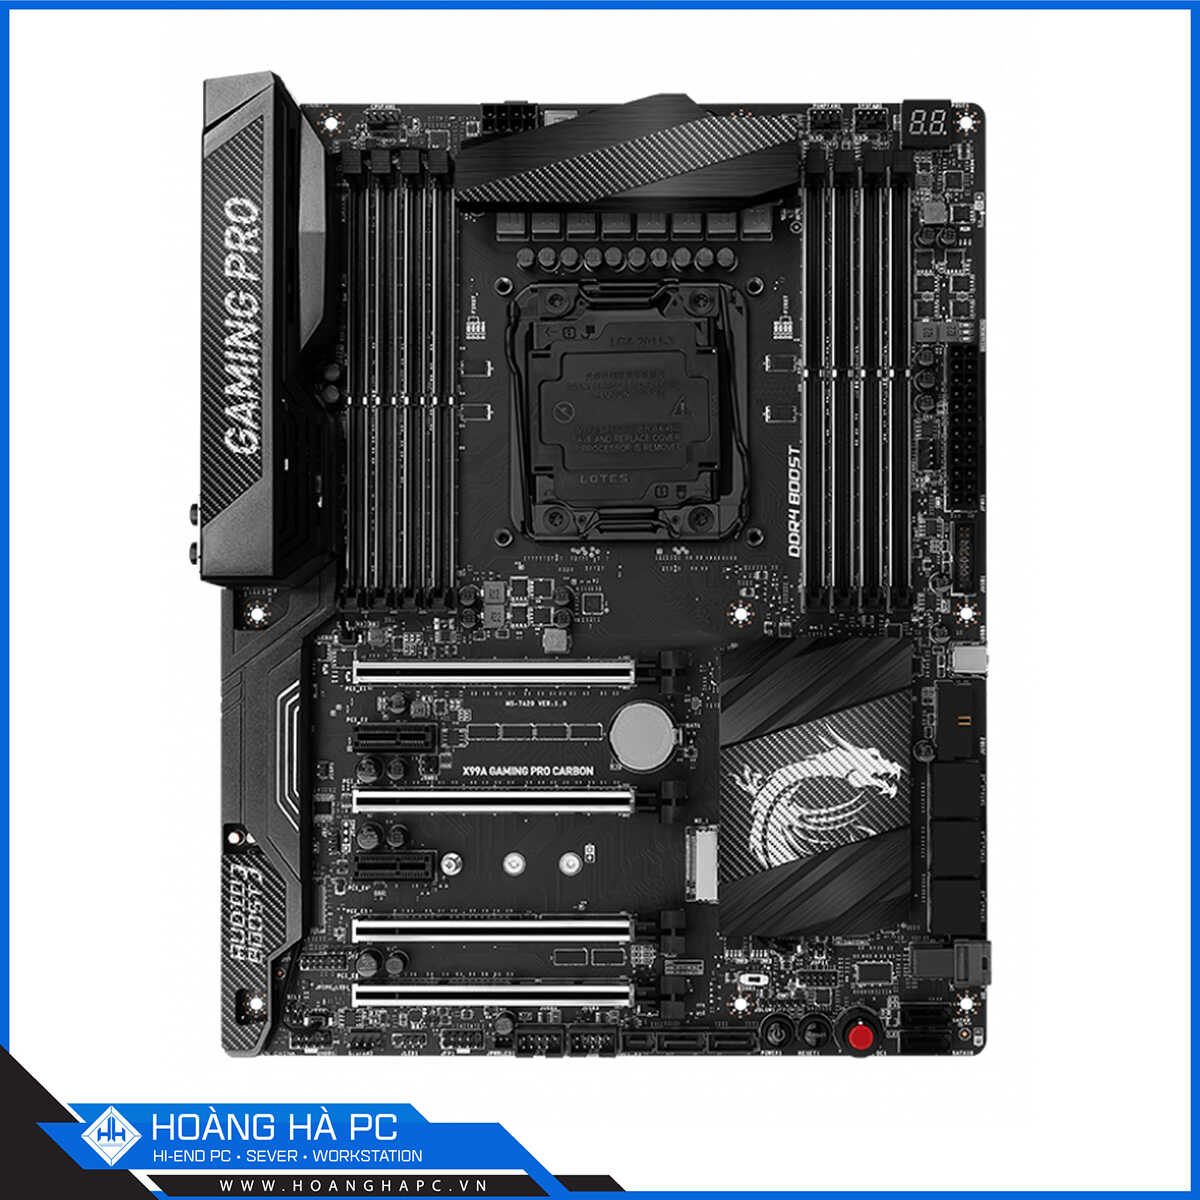 Mainboard MSI X99A Gaming Pro Carbon